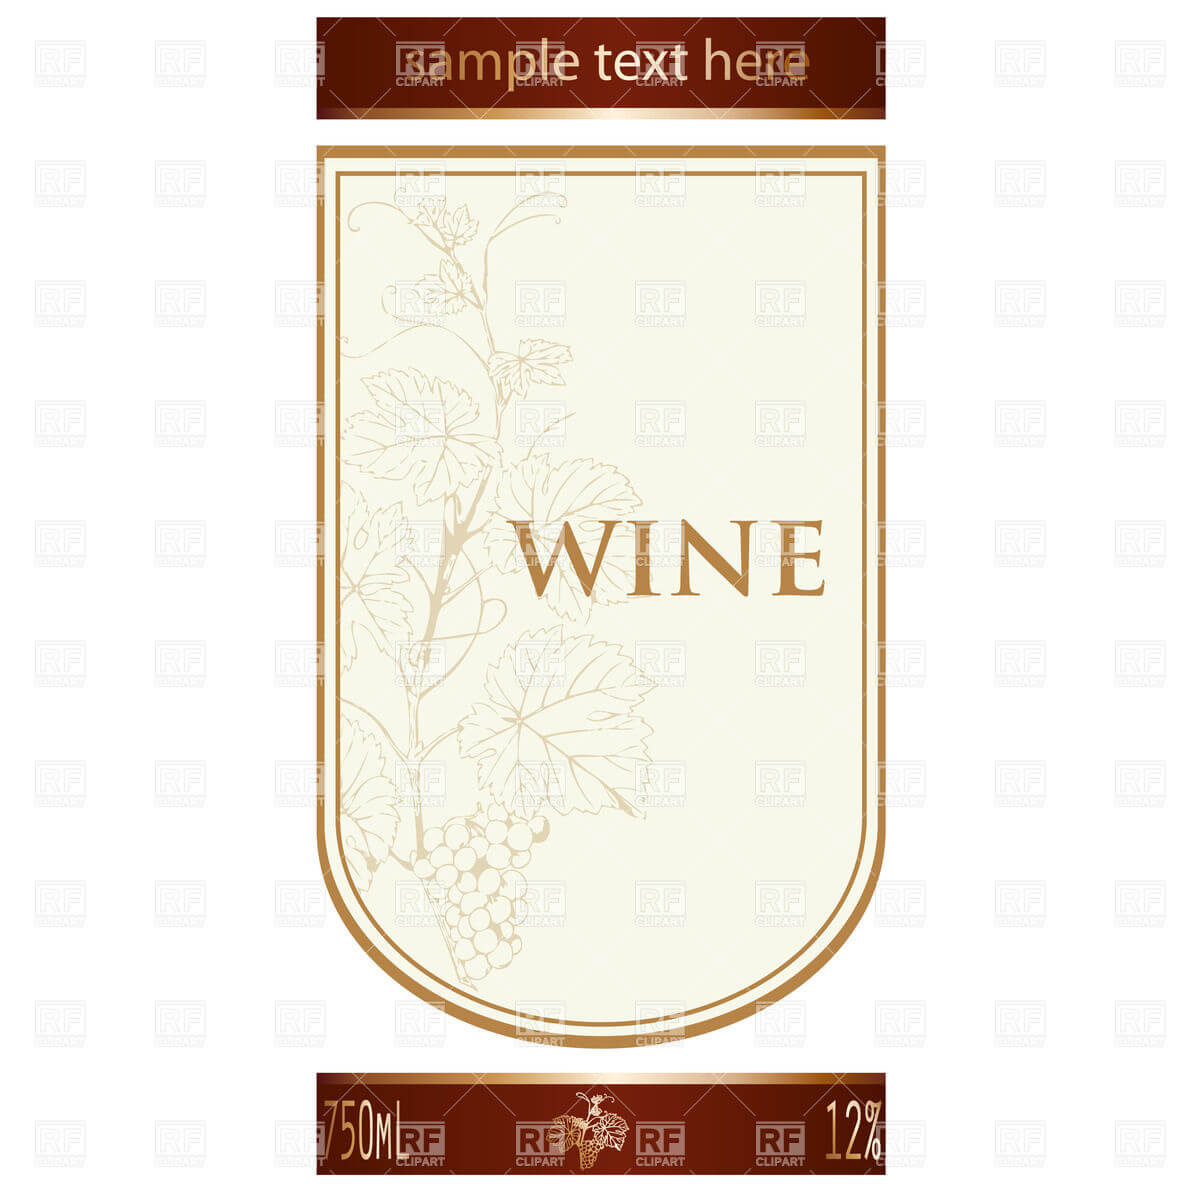 002 Template Ideas Free Wine Label Remarkable Bottle Pertaining To Blank Wine Label Template